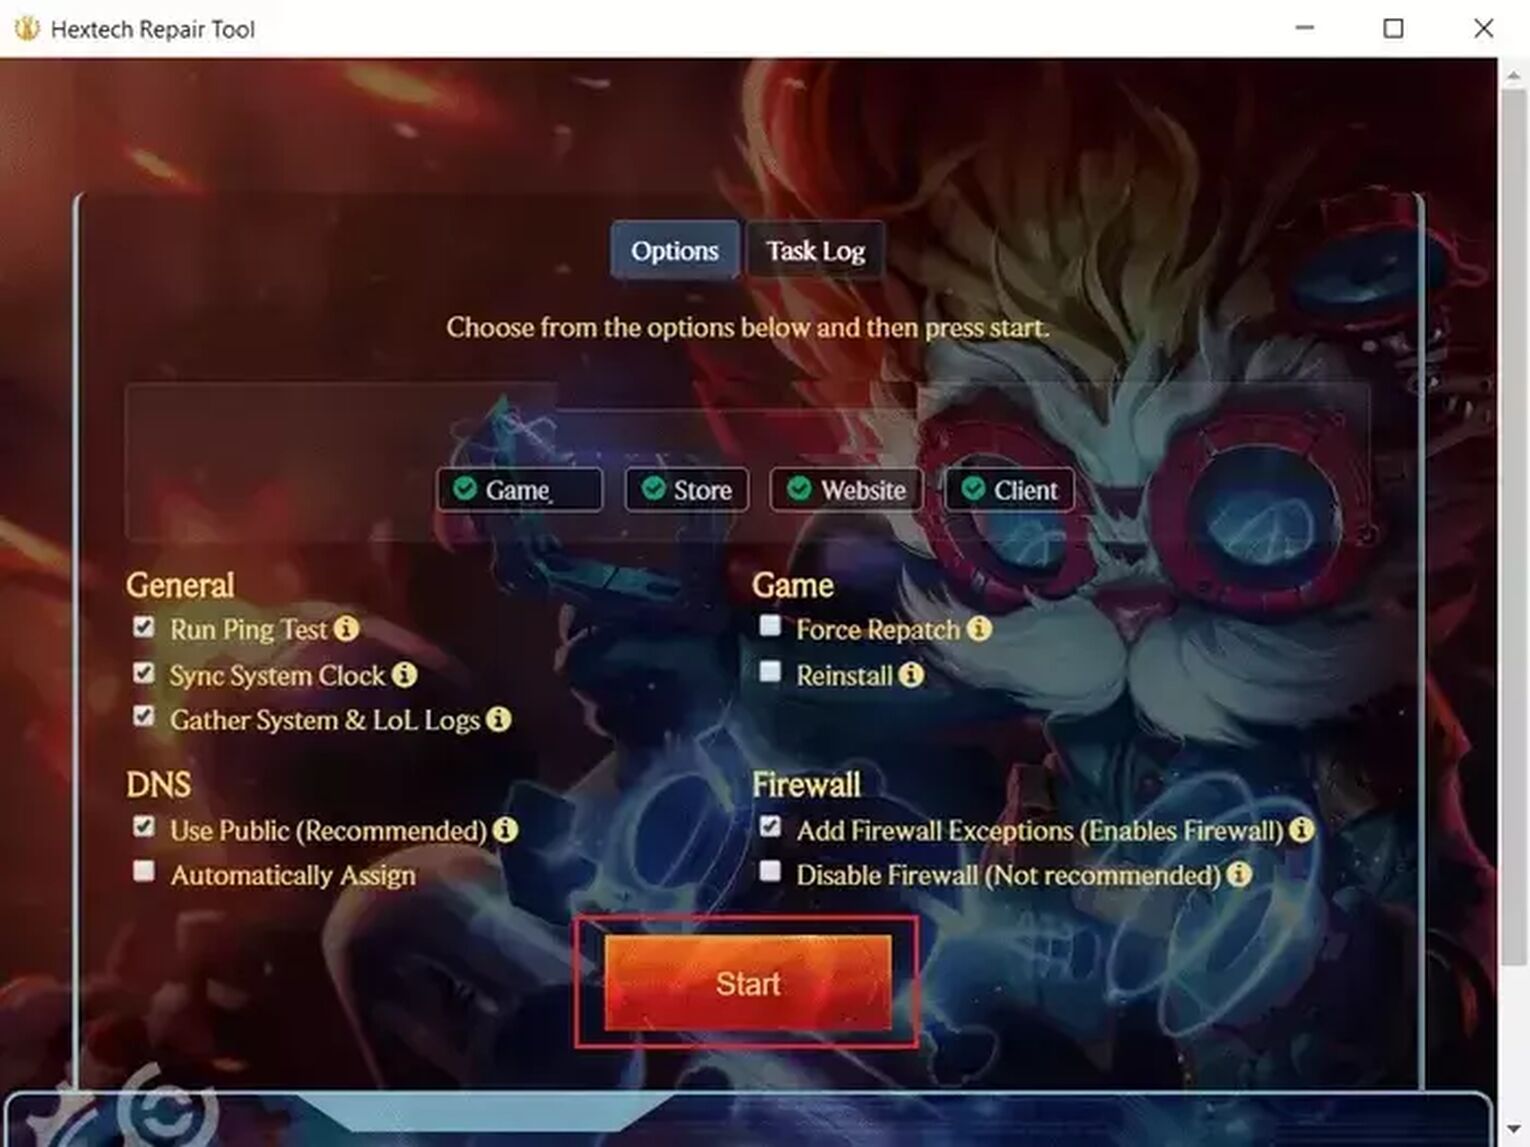 How to fix the “unable to connect to the authentication service” error in  League of Legends